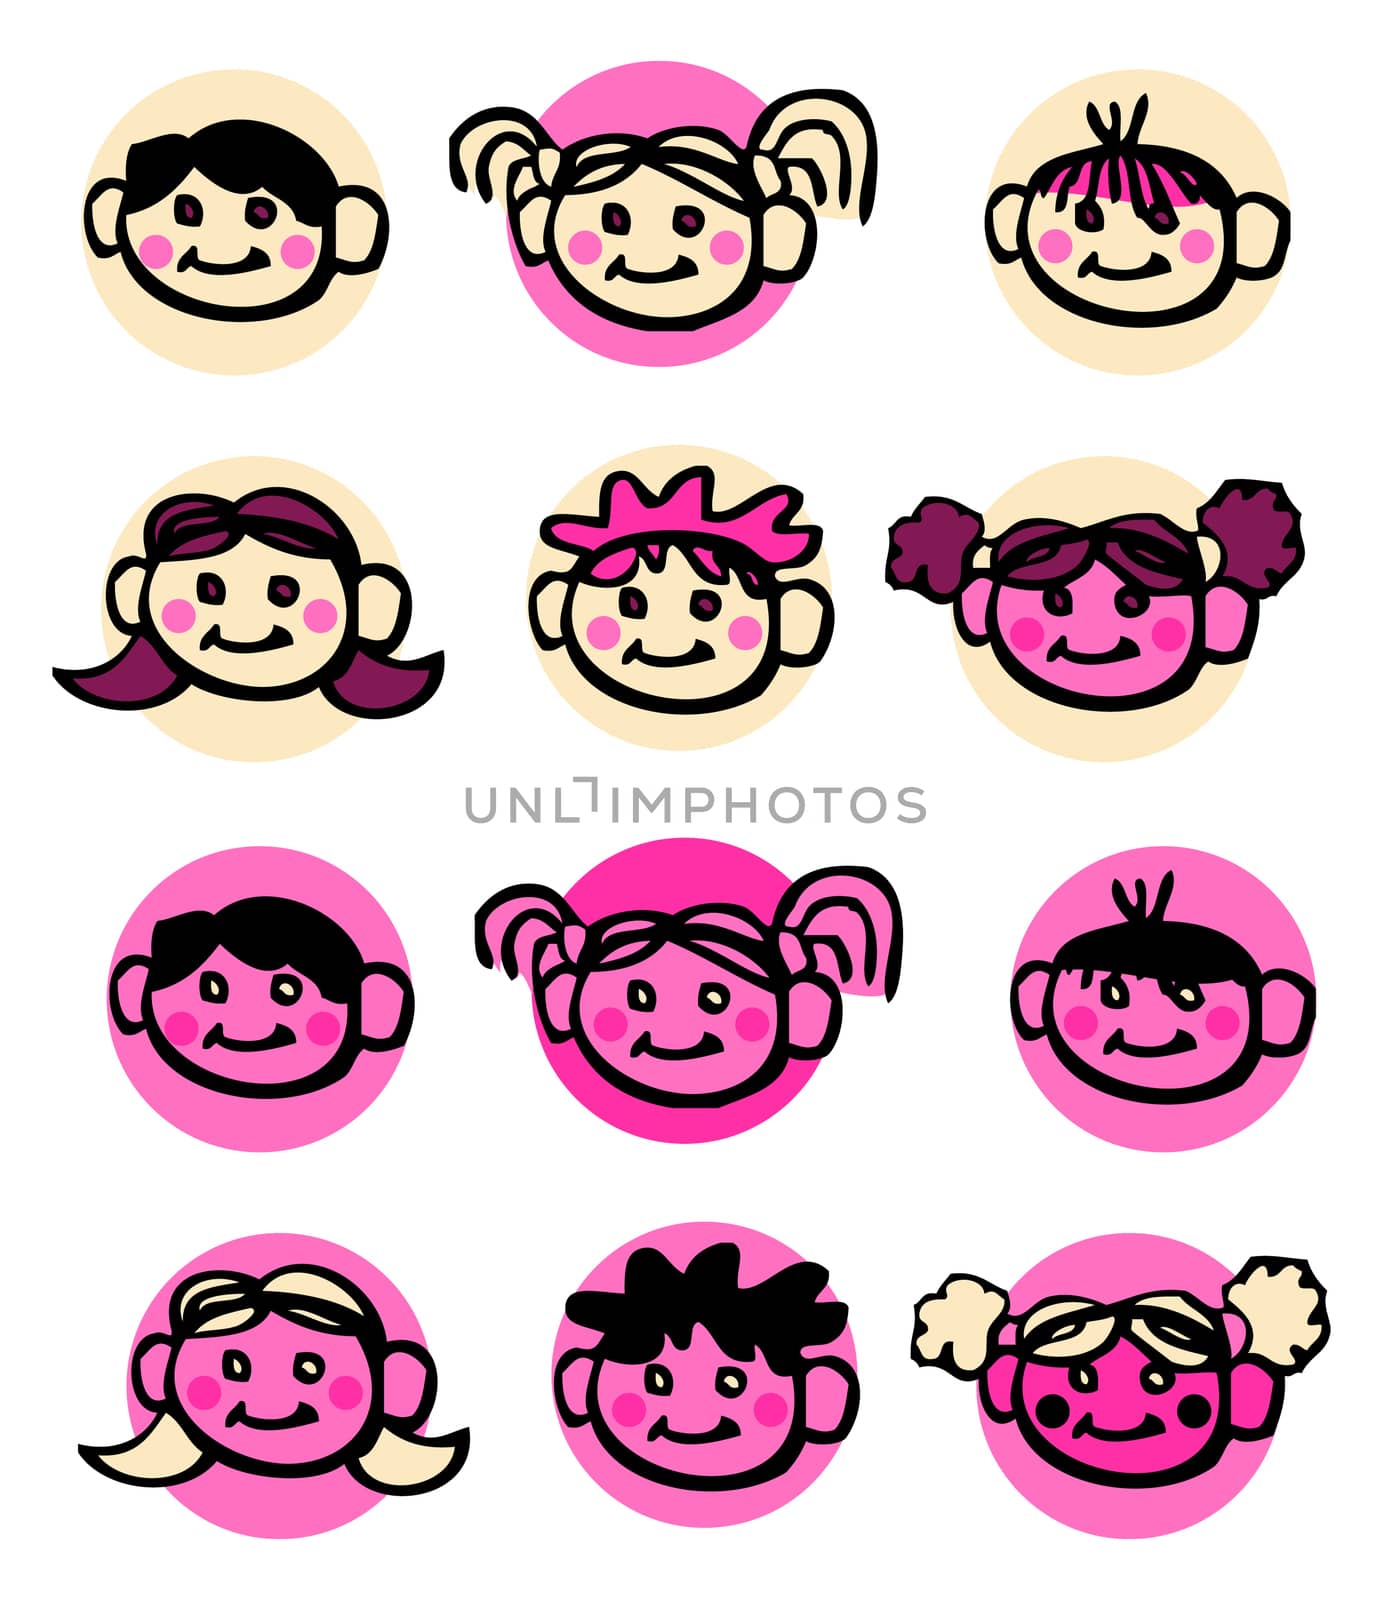 icons diversity Child, baby design elements by IconsJewelry